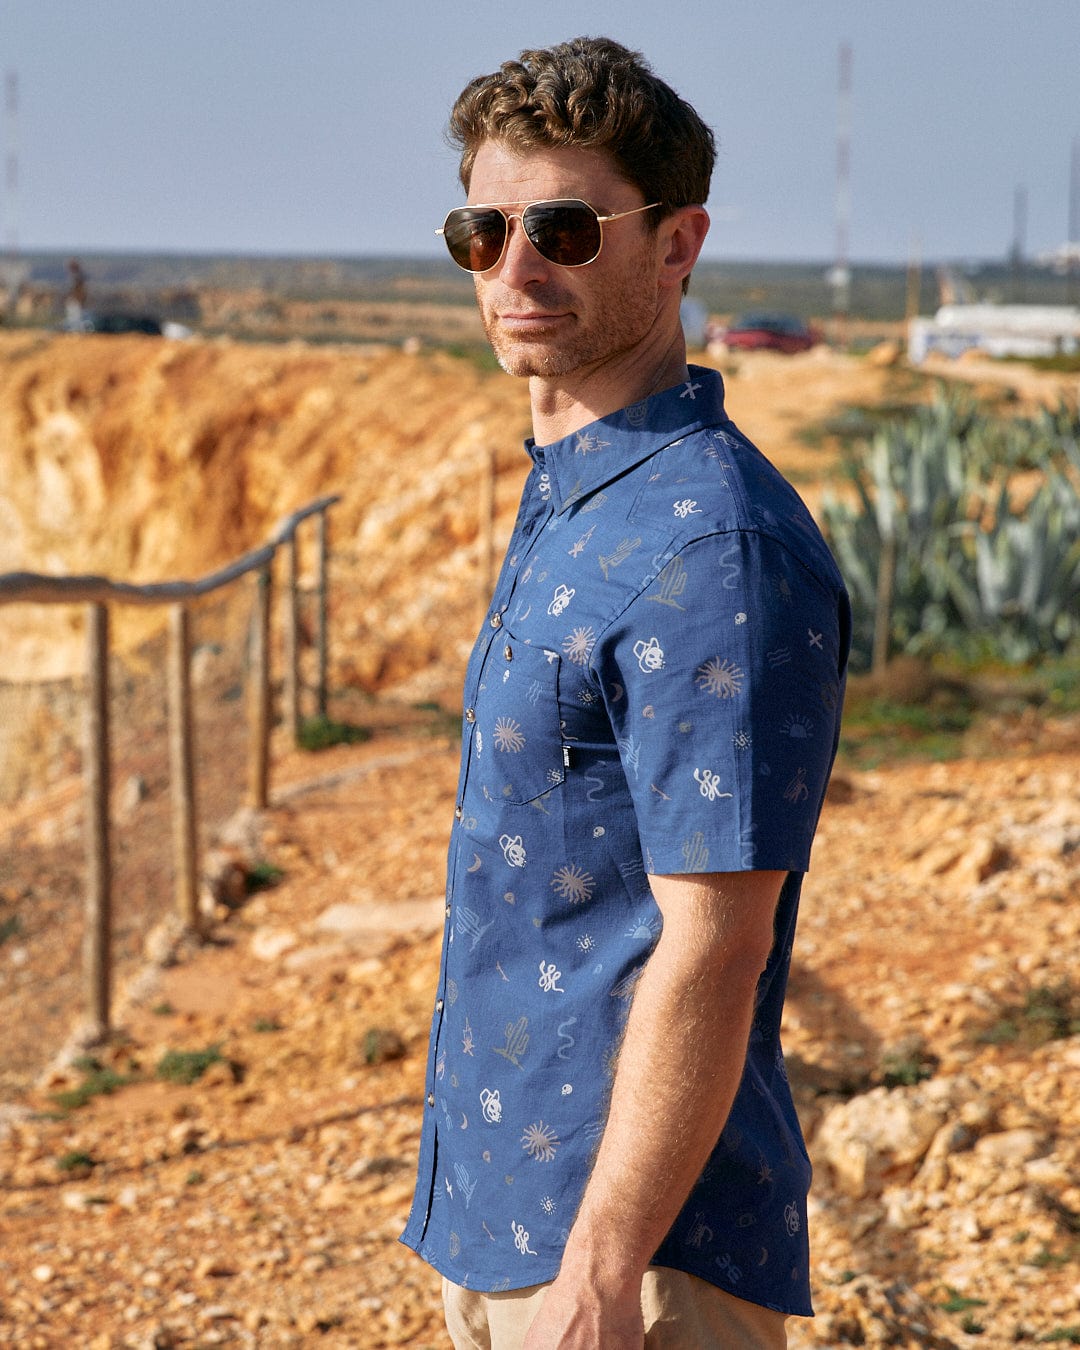 A man in a Last Stop - Mens Short Sleeve Shirt - Blue by Saltrock standing on a dirt road.